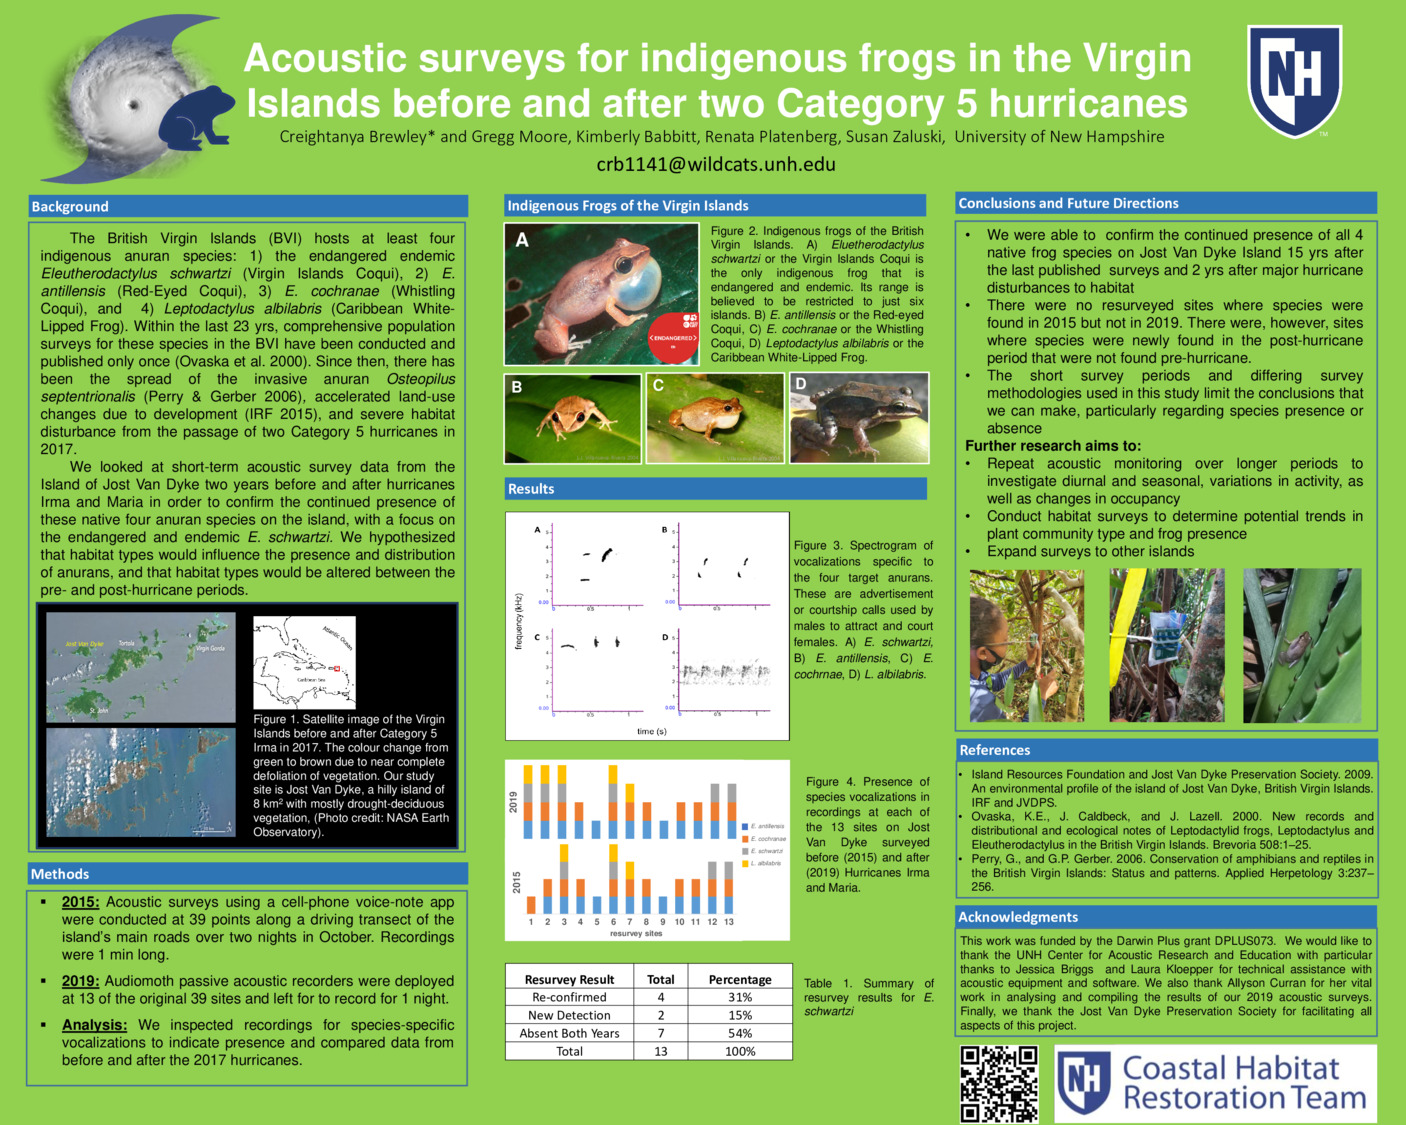 Acoustic Surveys For Indigenous Frogs In The Virgin Islands Before And After Two Category 5 Hurricanes by crb1141